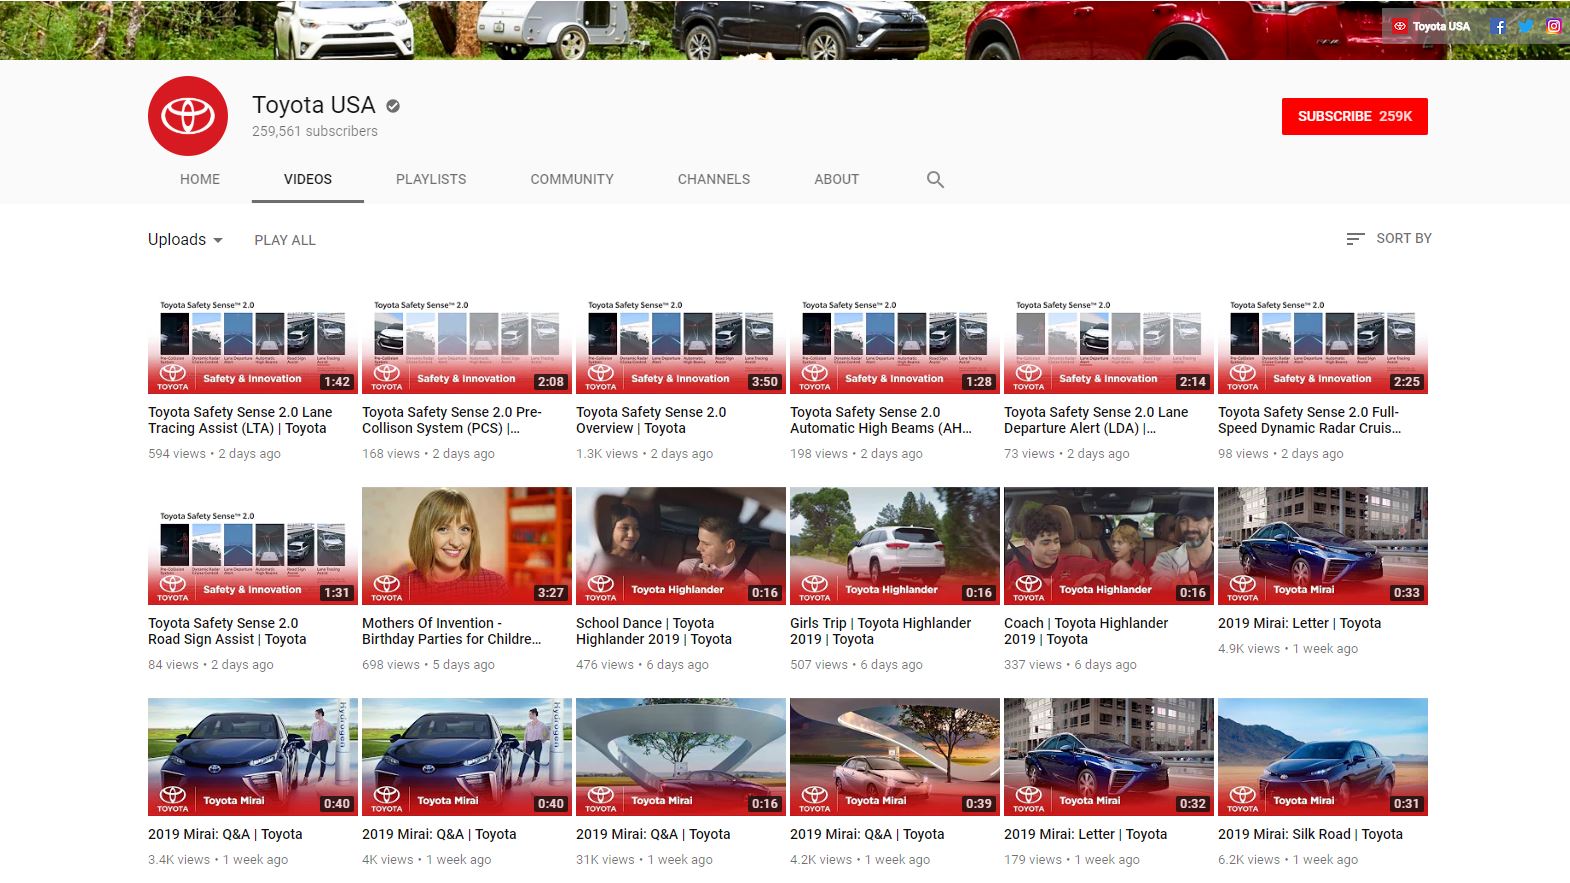 YouTube SEO Video Content Strategy - Toyota YouTube SEO: Video Content Optimization Basics